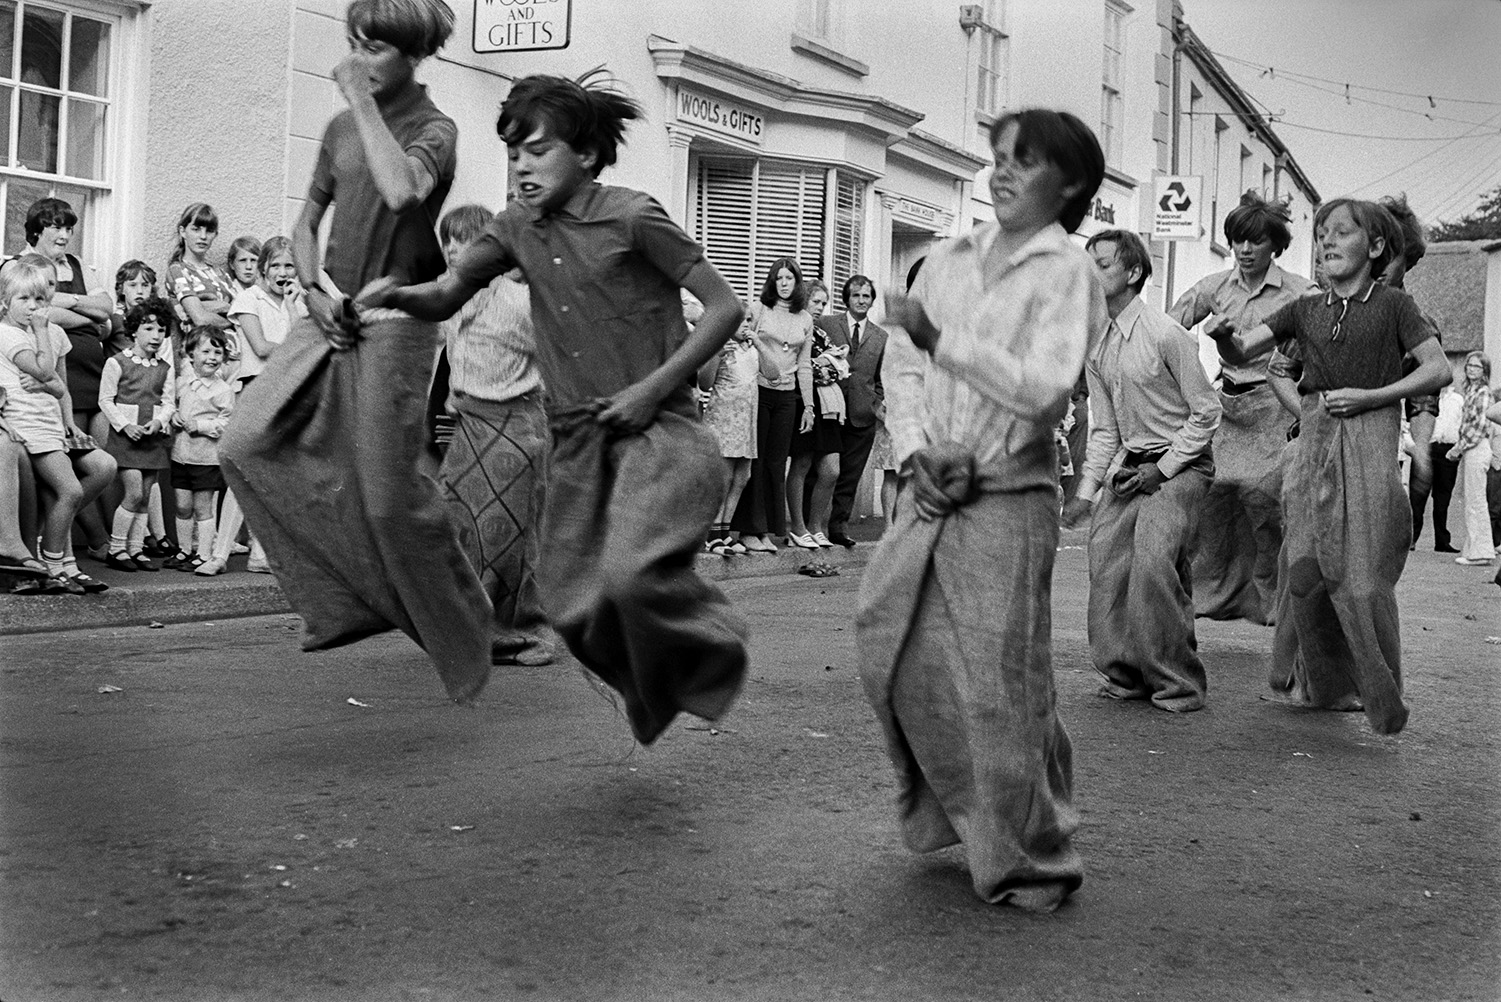 Boys competing in a sack race through a street at Chulmleigh Fair. Spectators are watching outside the shop front of 'Wools & Gifts'.